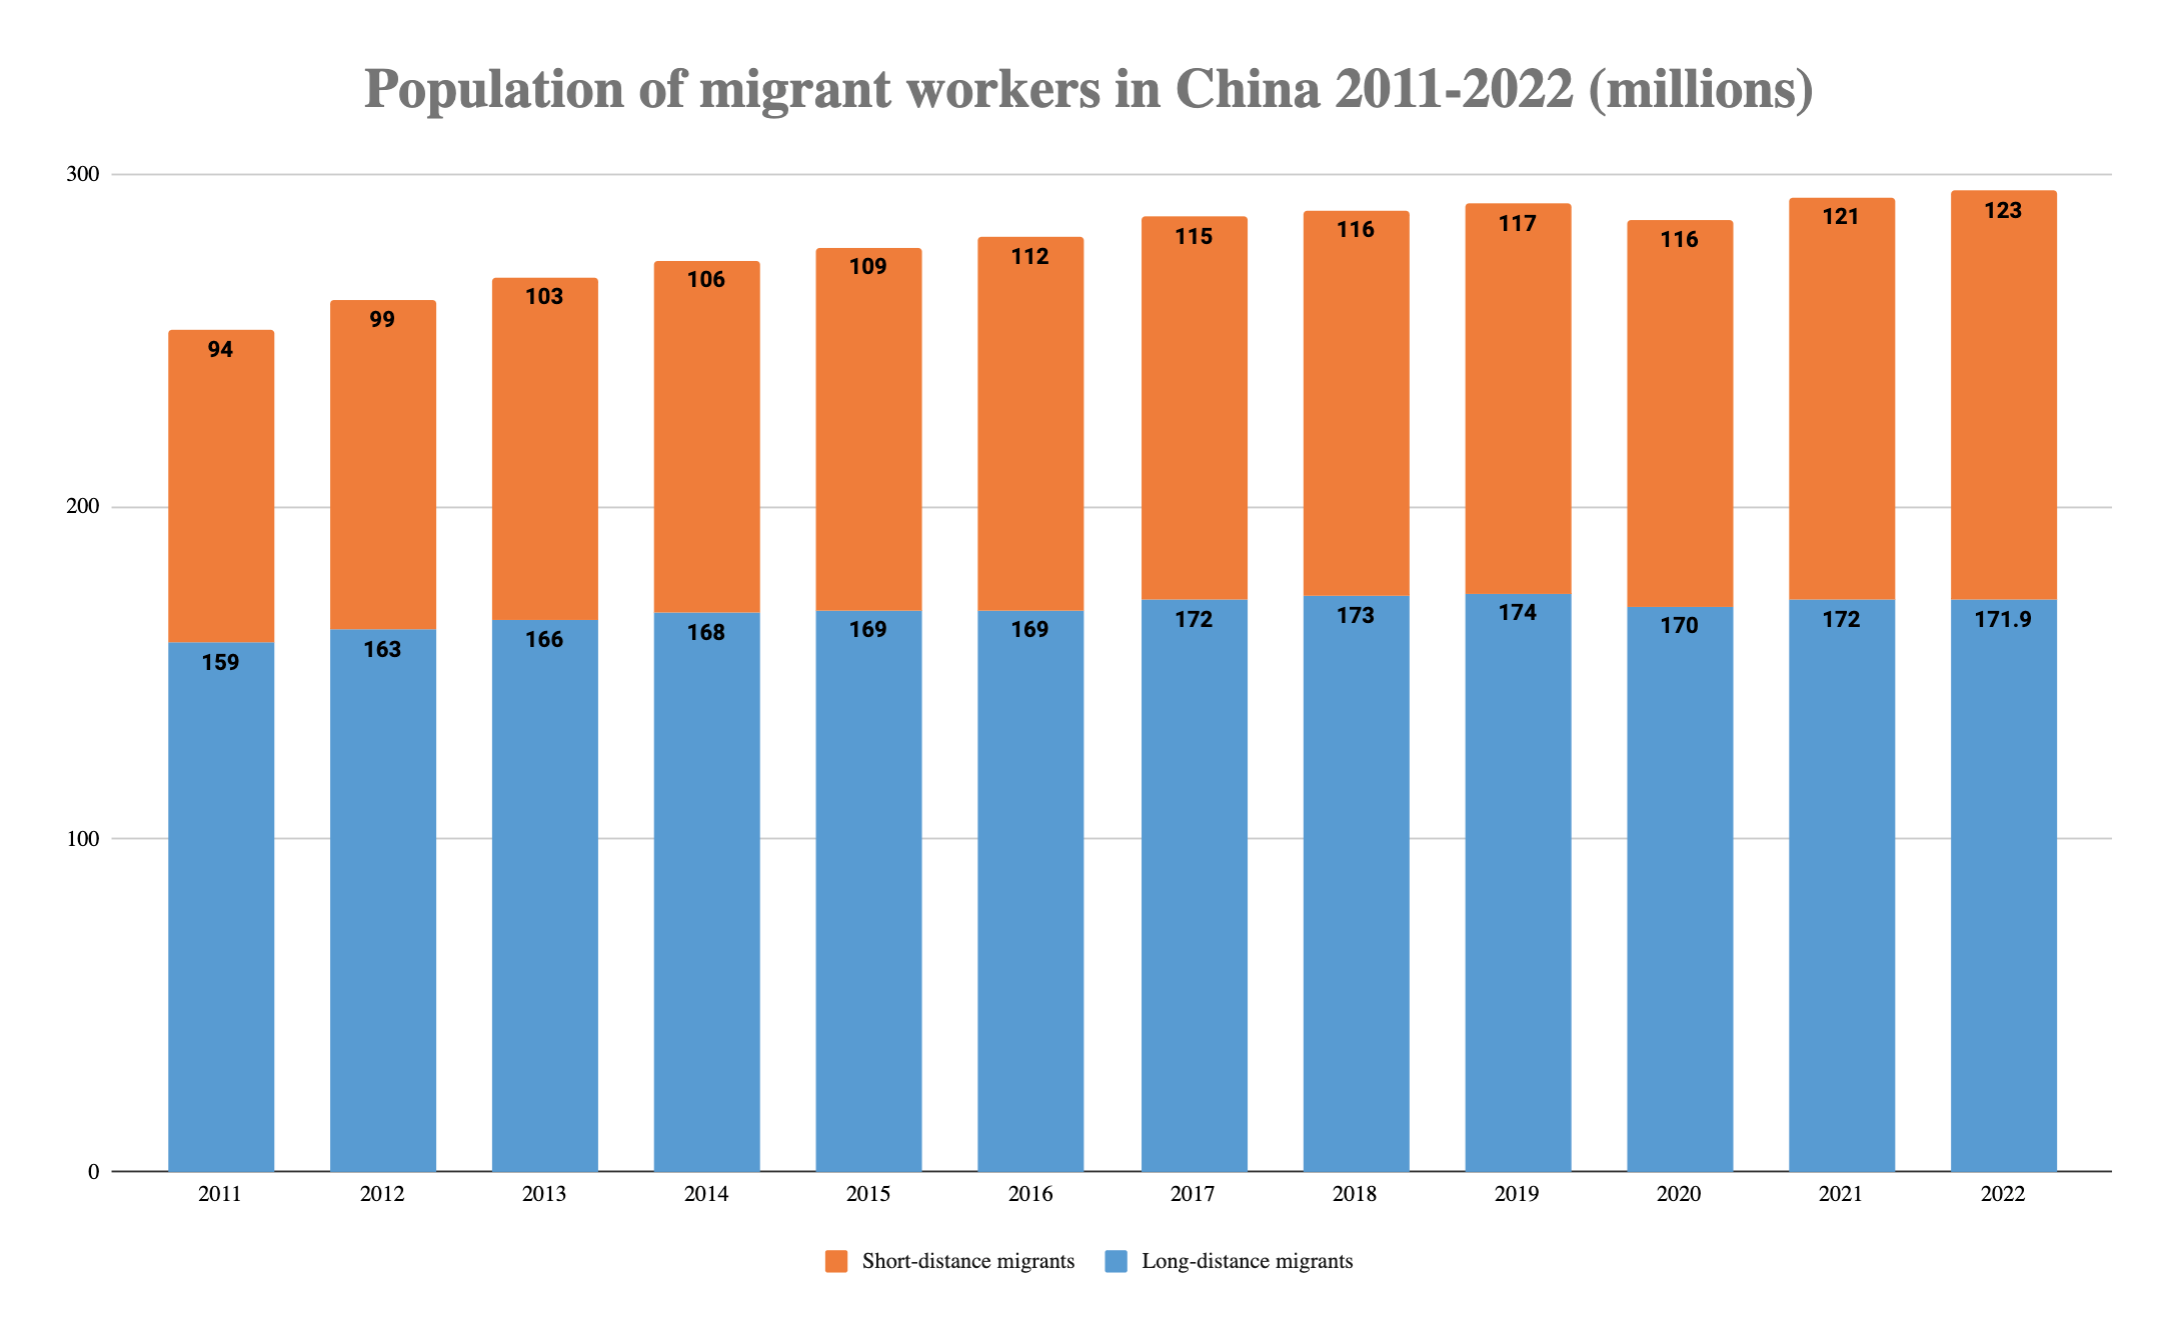 A CLB graph shows the change in migrant worker population over time, divided by short-distance and long-distance migrants